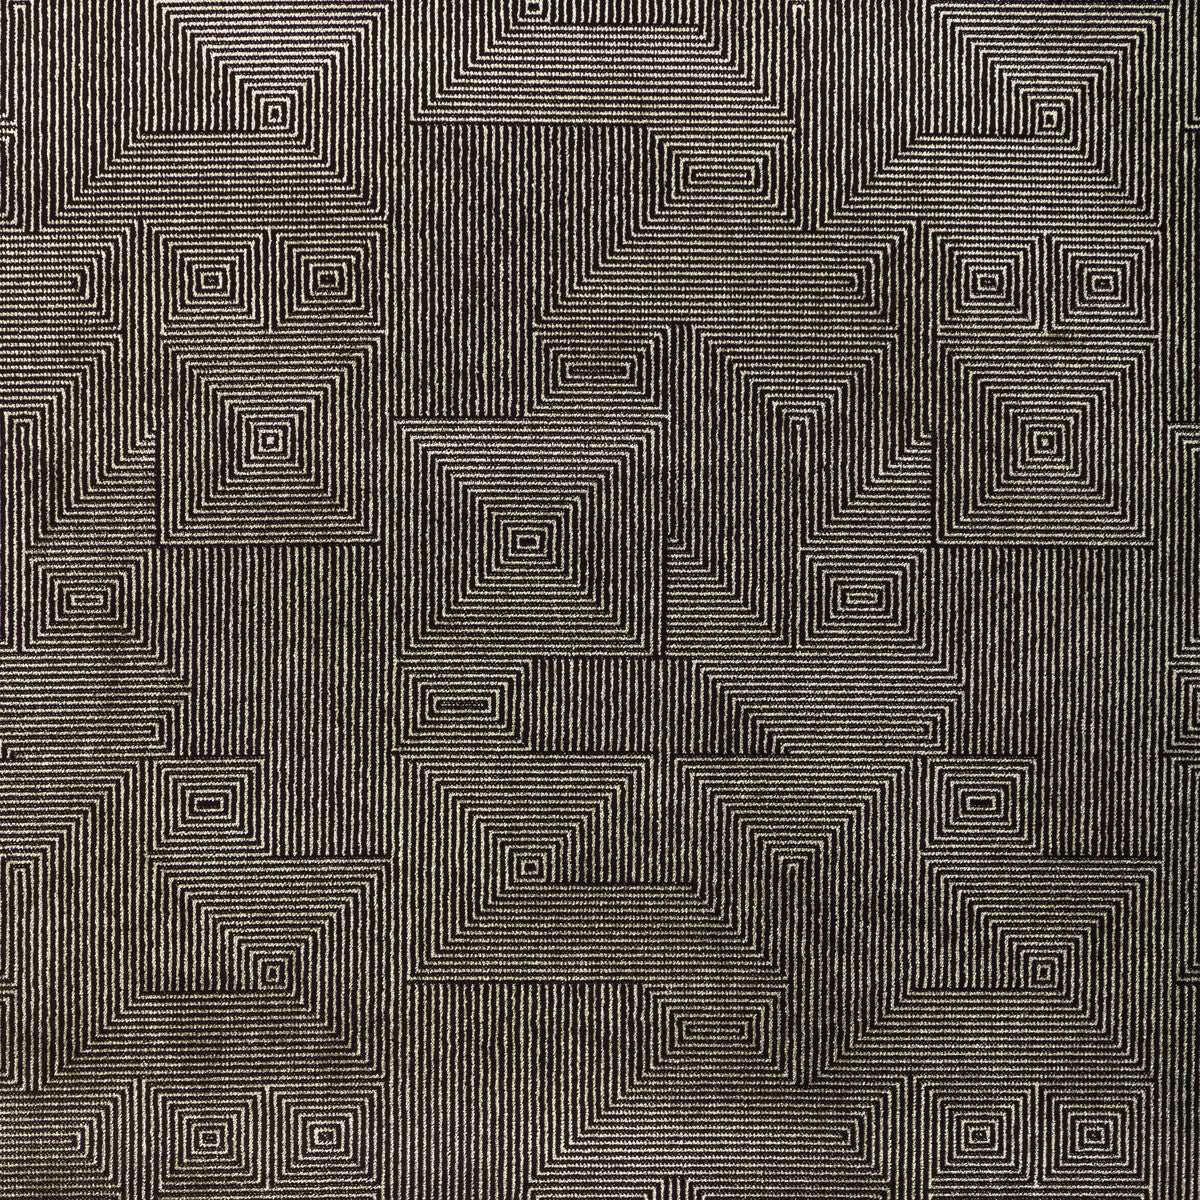 New Order fabric in mahogany color - pattern 36043.8.0 - by Kravet Contract